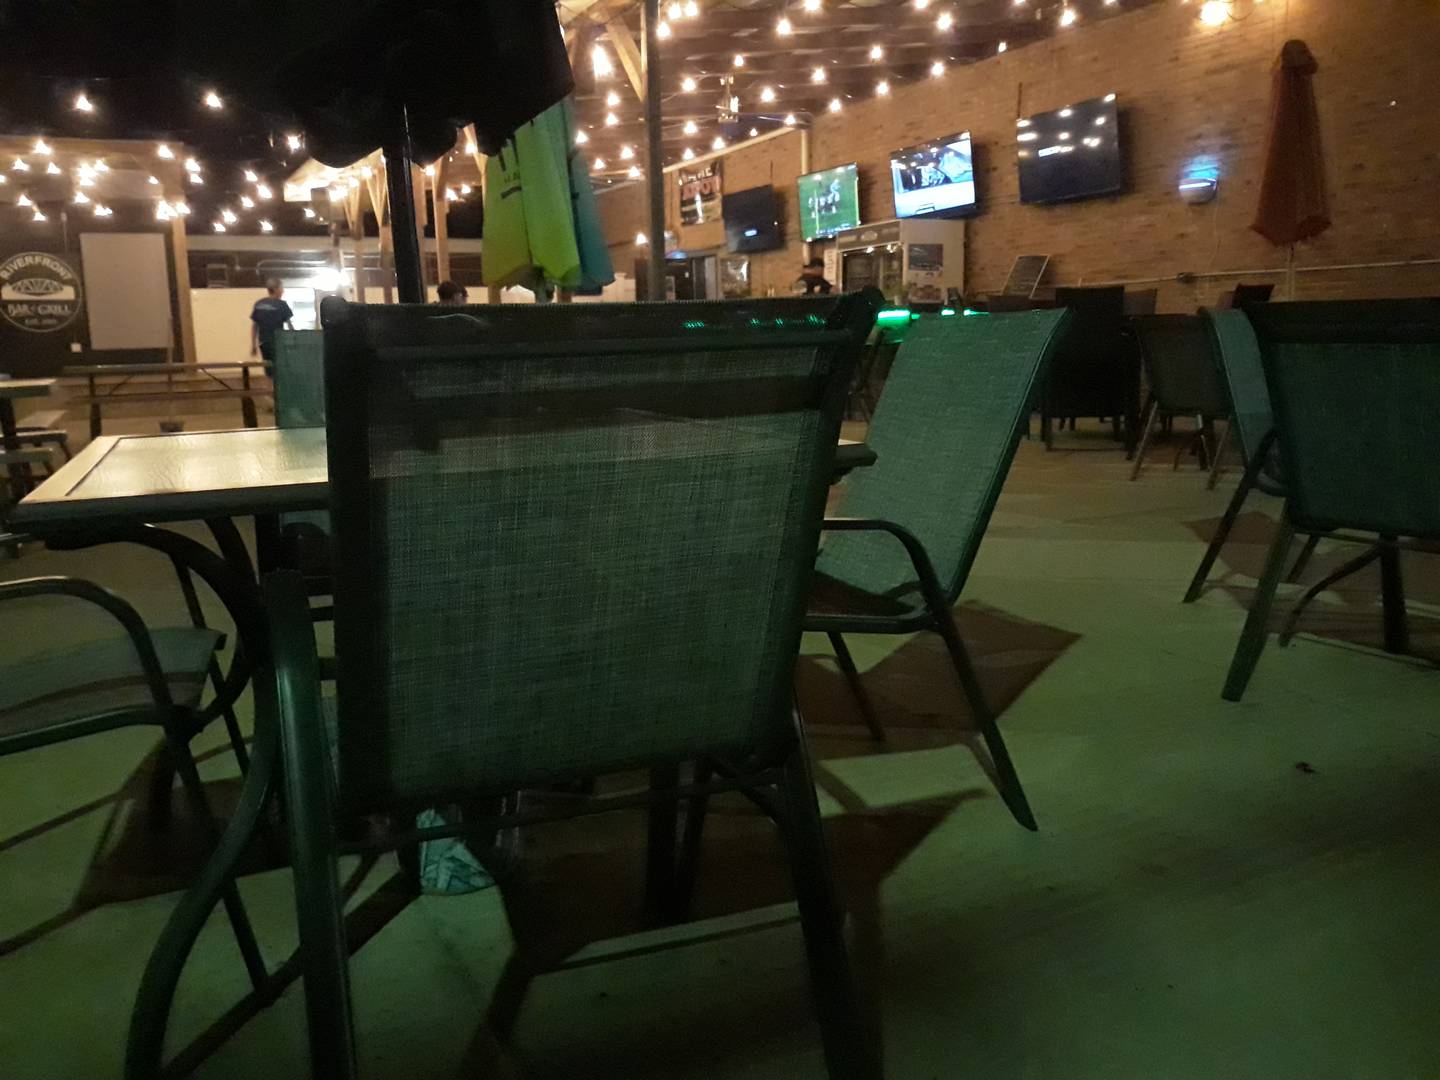 The outdoor patio with a bar at Riverfront Bar and Grill in Peru provides views of the river and a place to relax outdoors for a meal or drinks.